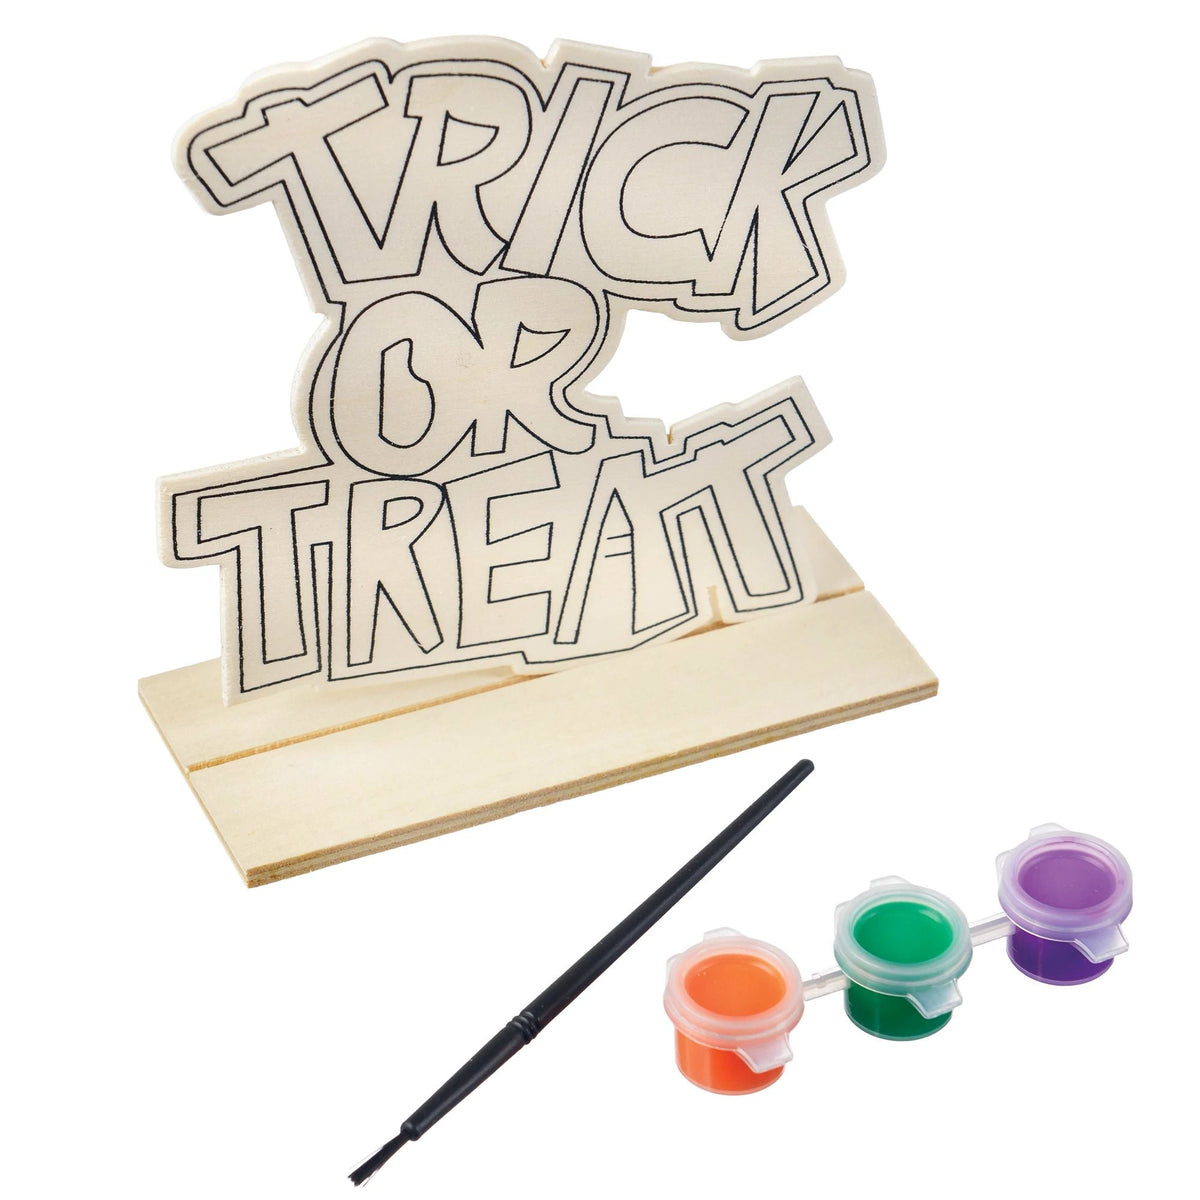 AMSCAN CA Halloween Halloween Trick or Treat MDF Painting Activity Set, 5 x 5 Inches, 1 Count